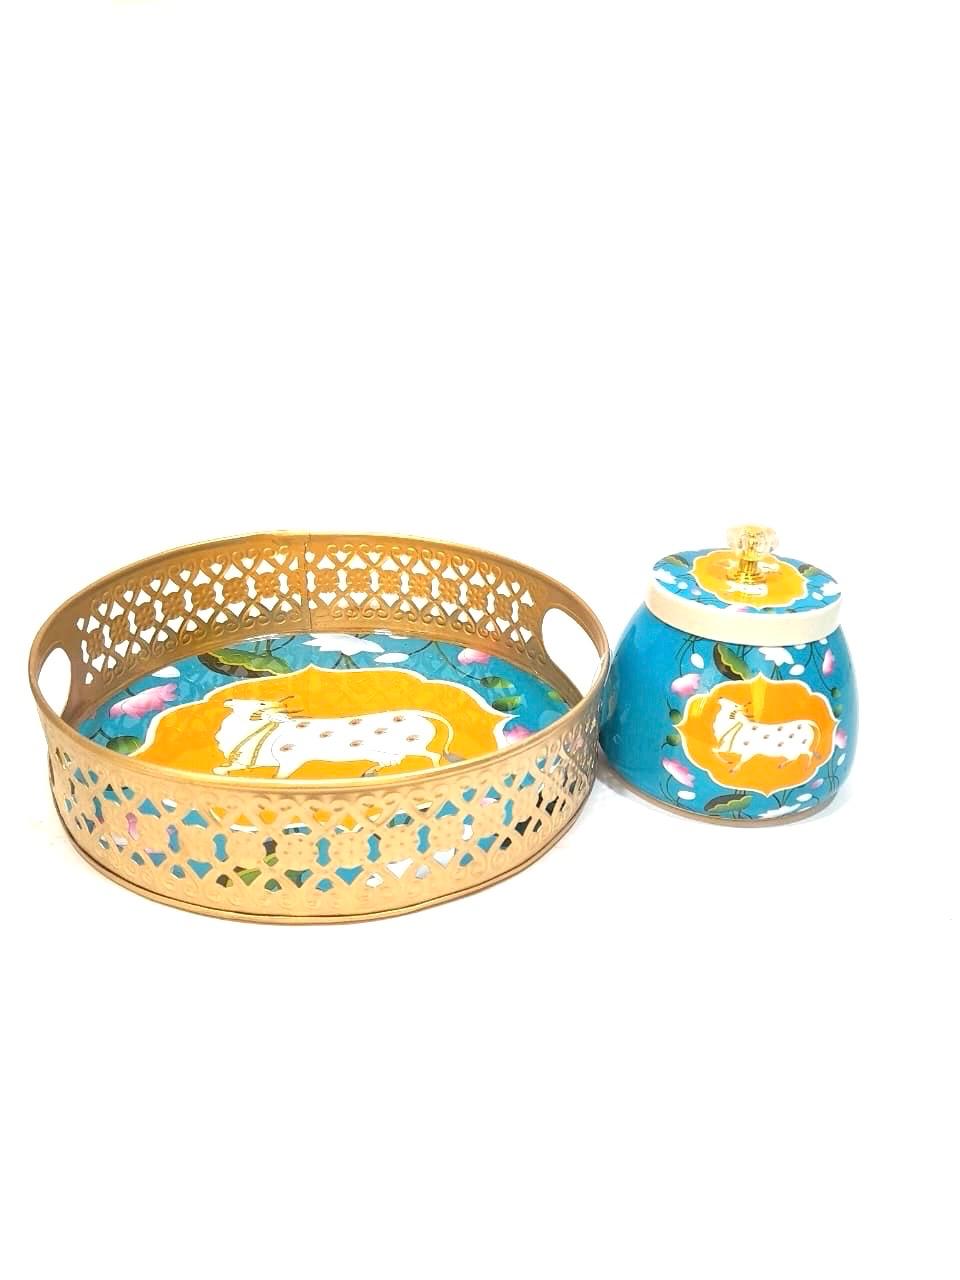 Platter With Jar Set In New Designs Metal Handcrafted Home Utility From Tamrapatra